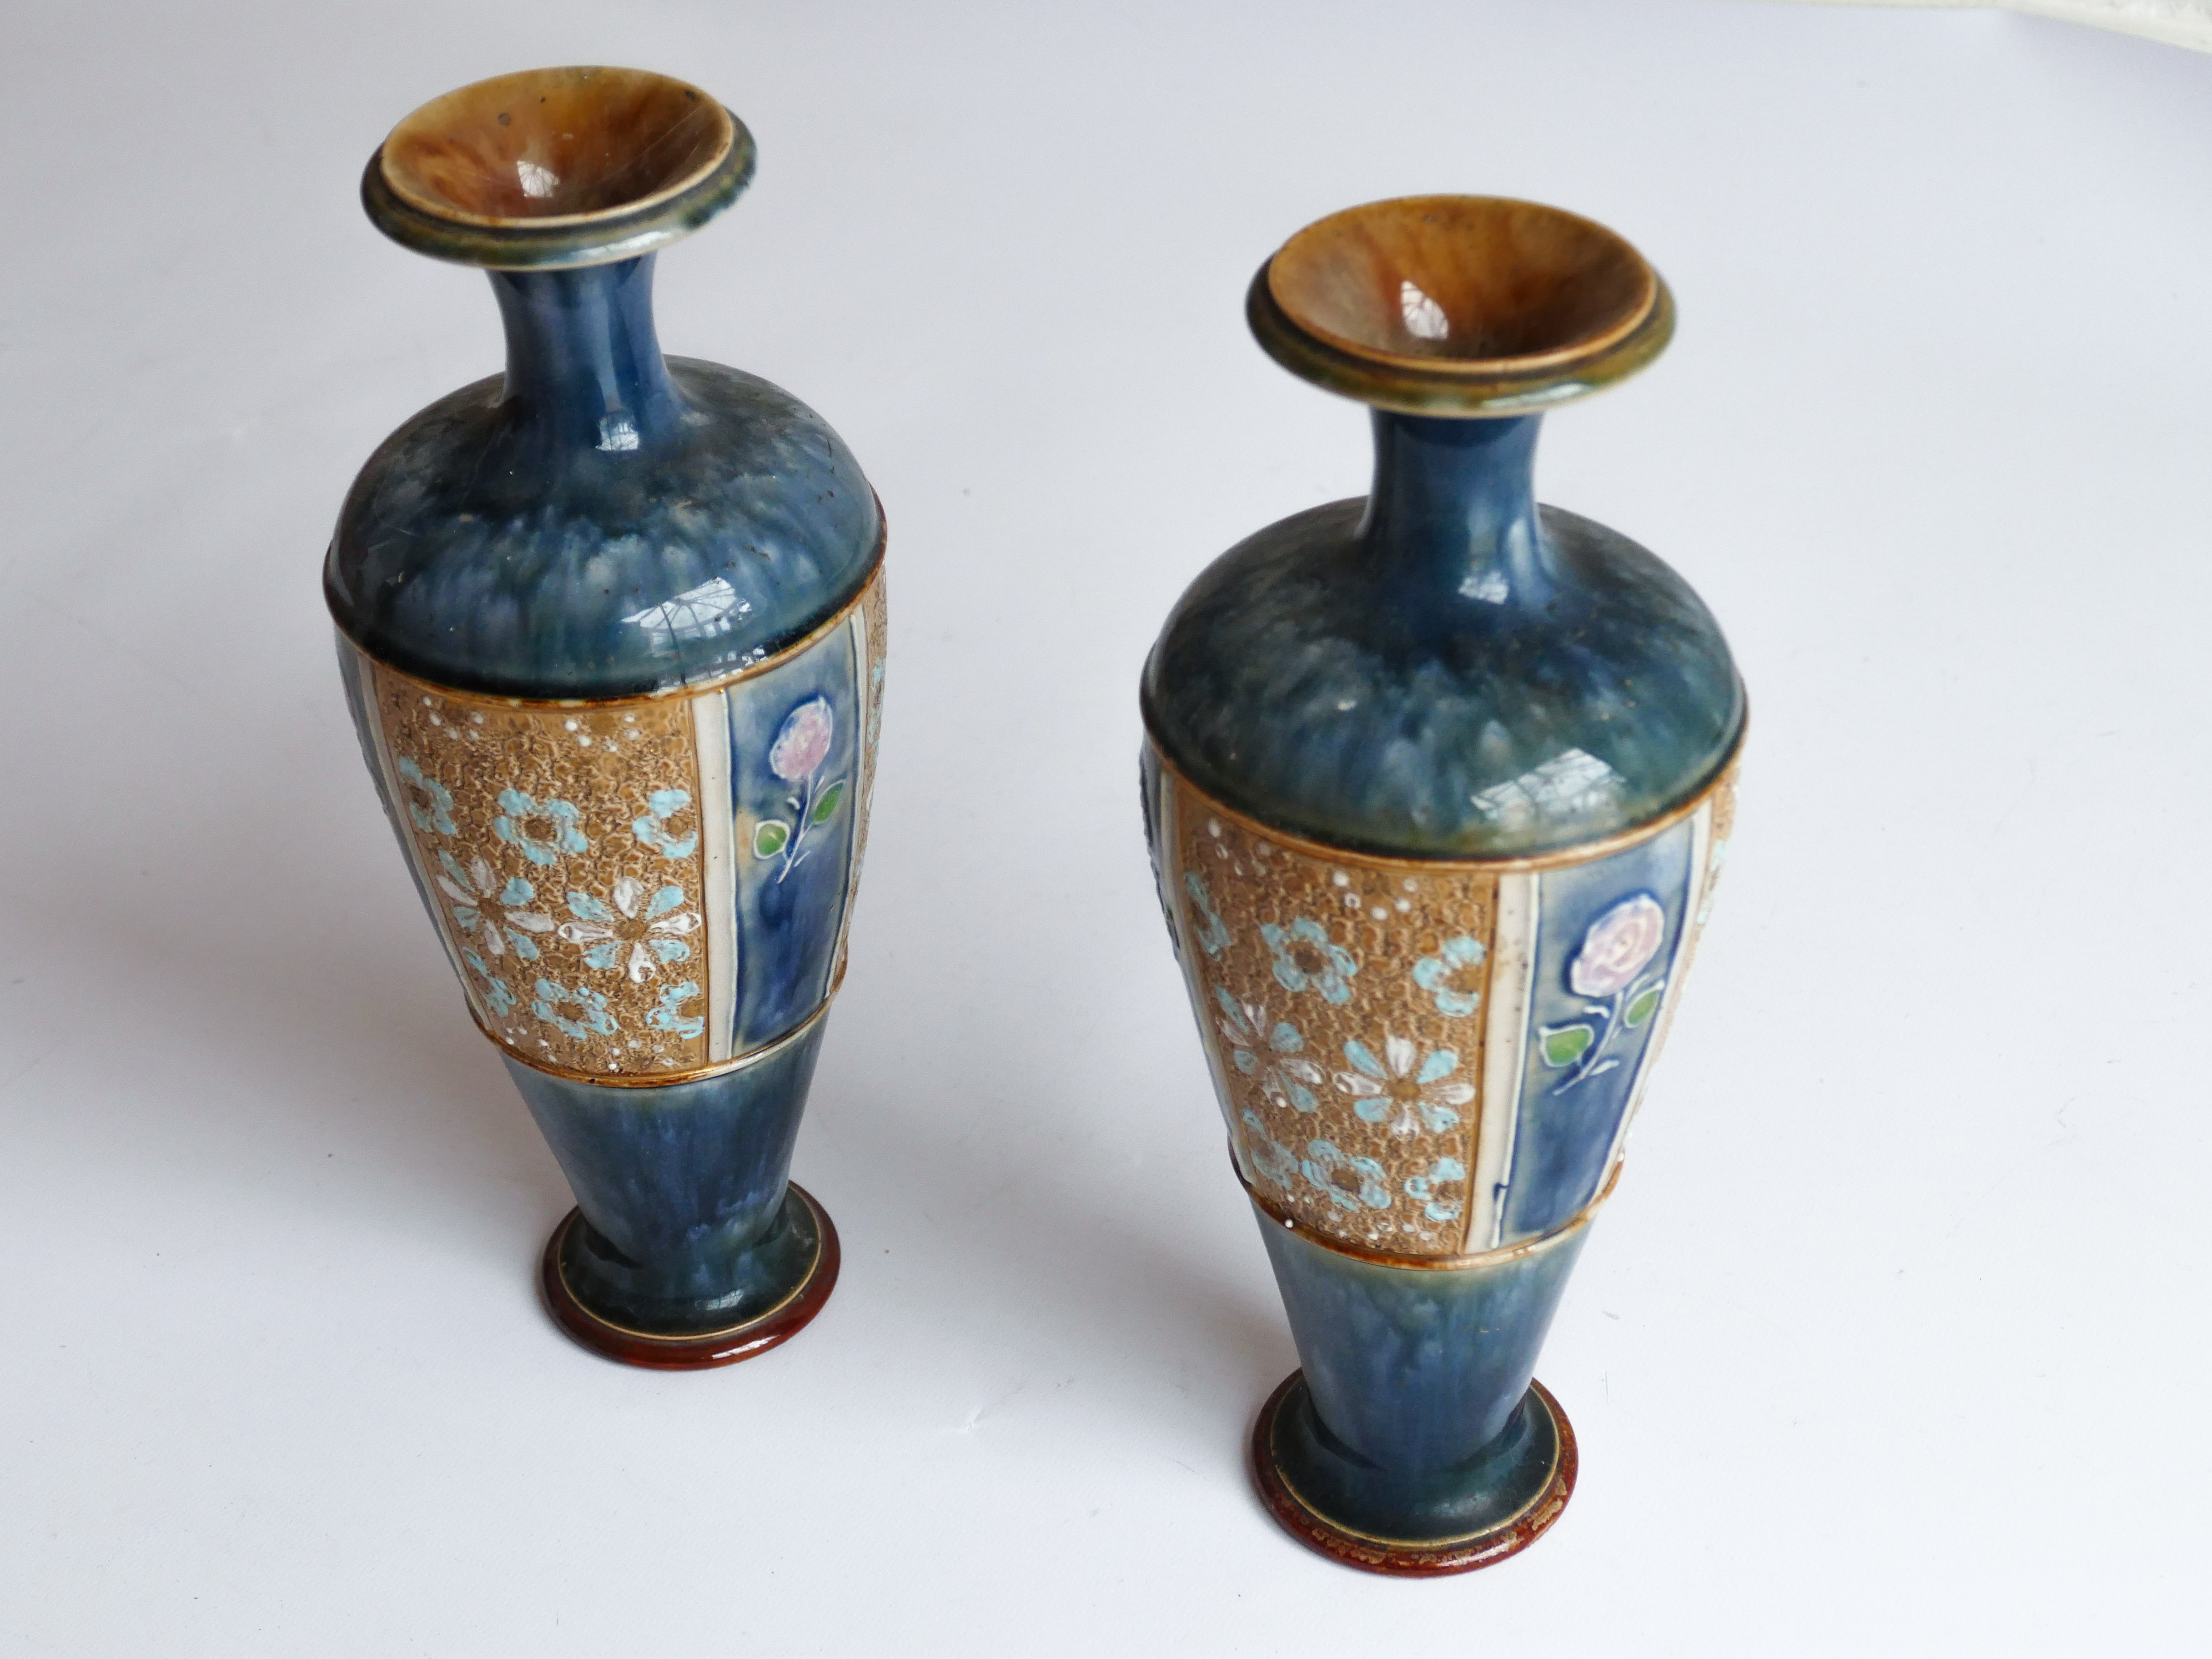 ROYAL DOULTON PAIR OF GLAZED ANTIQUE TAPESTRY VASES CHINA FLORAL MADE IN ENGLAND ART NOUVEAU LAMBETH - Image 2 of 4